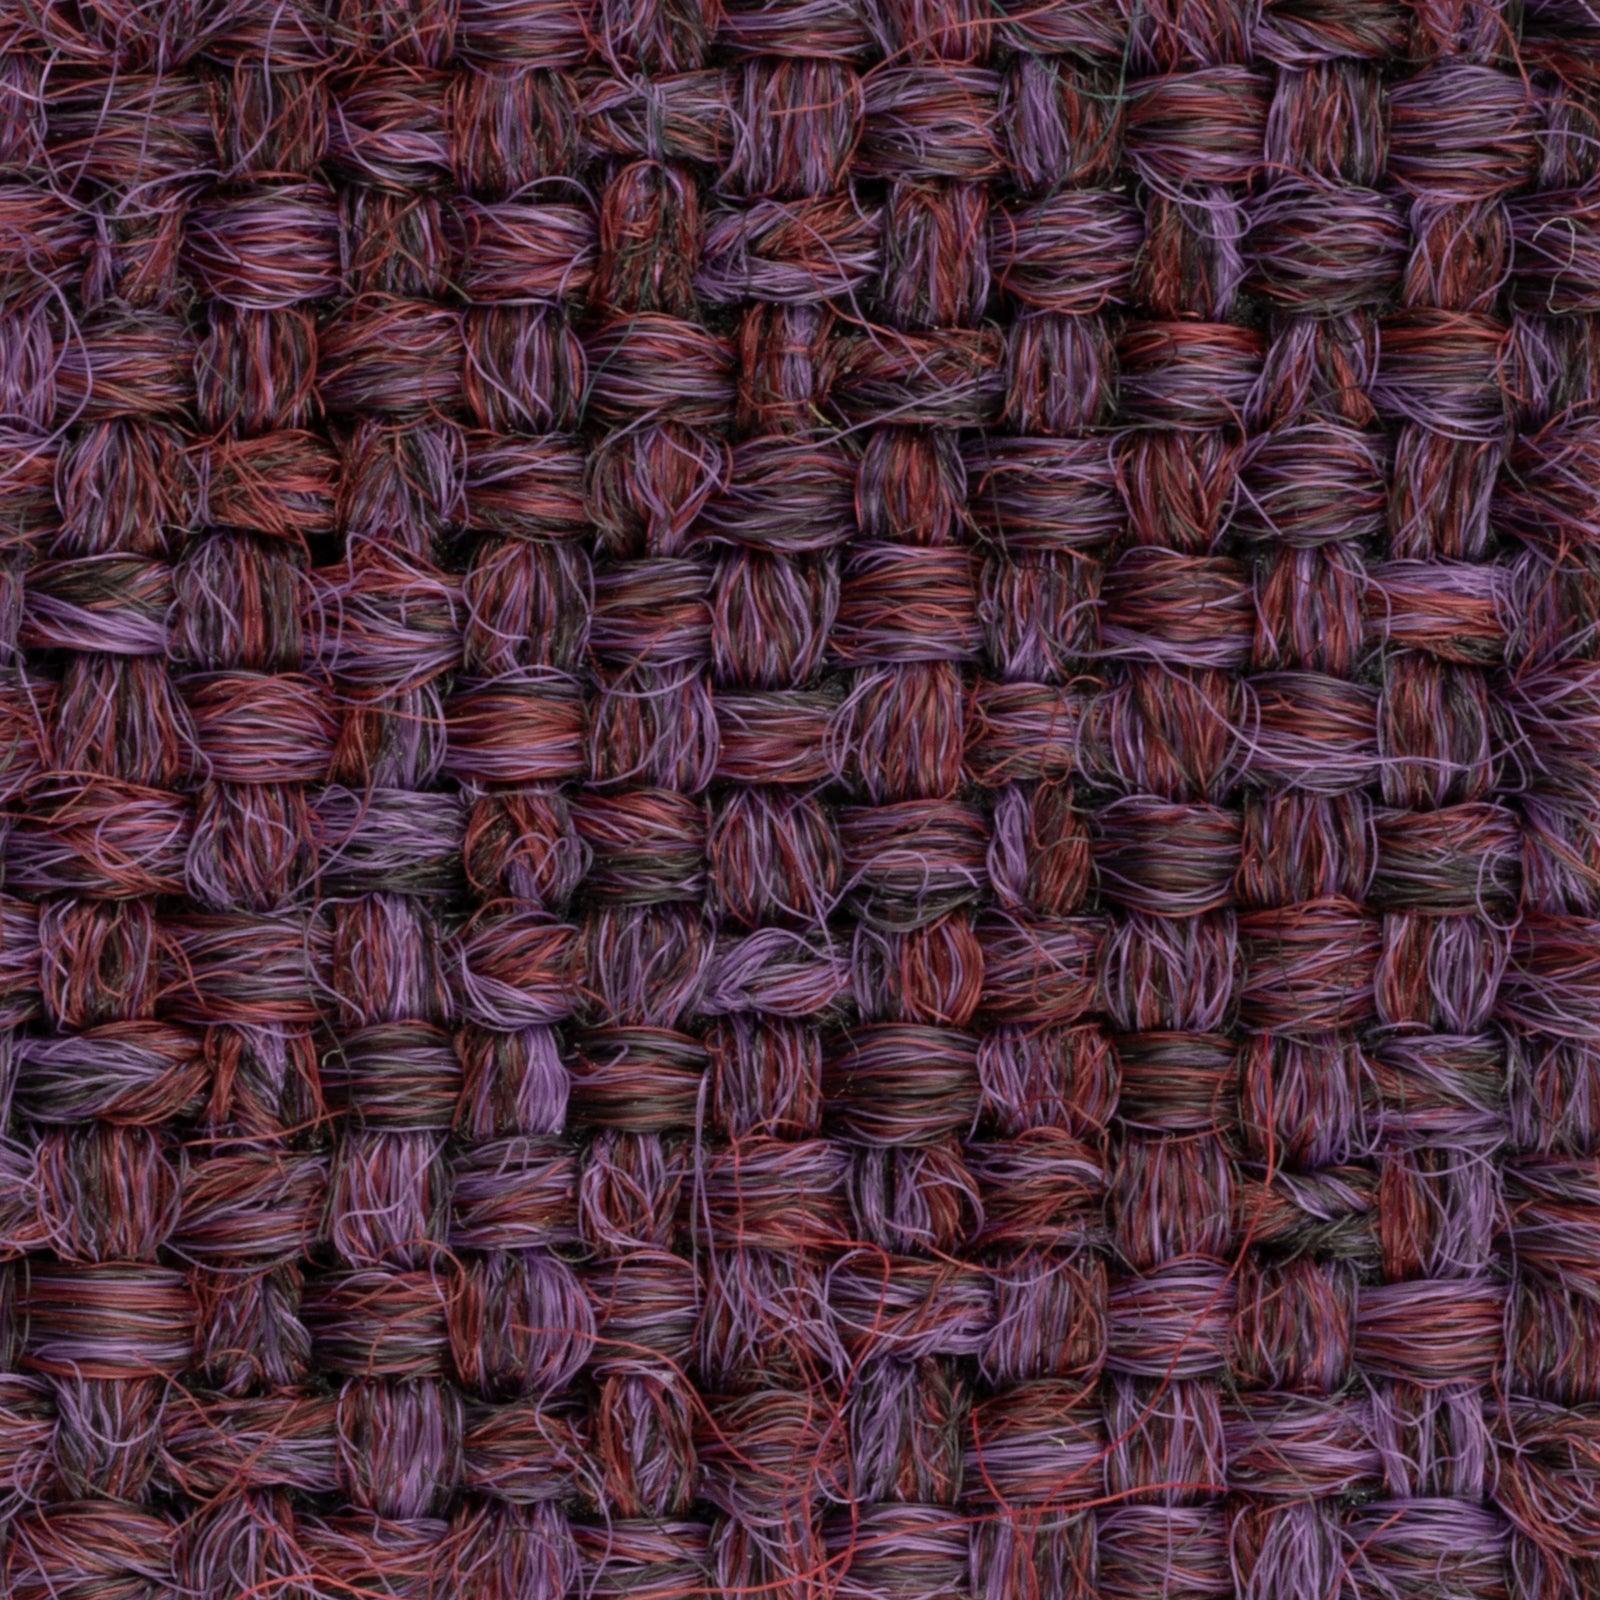 Upholstery - Other Supplies - Upholstery Thread - Page 1 - Fabric